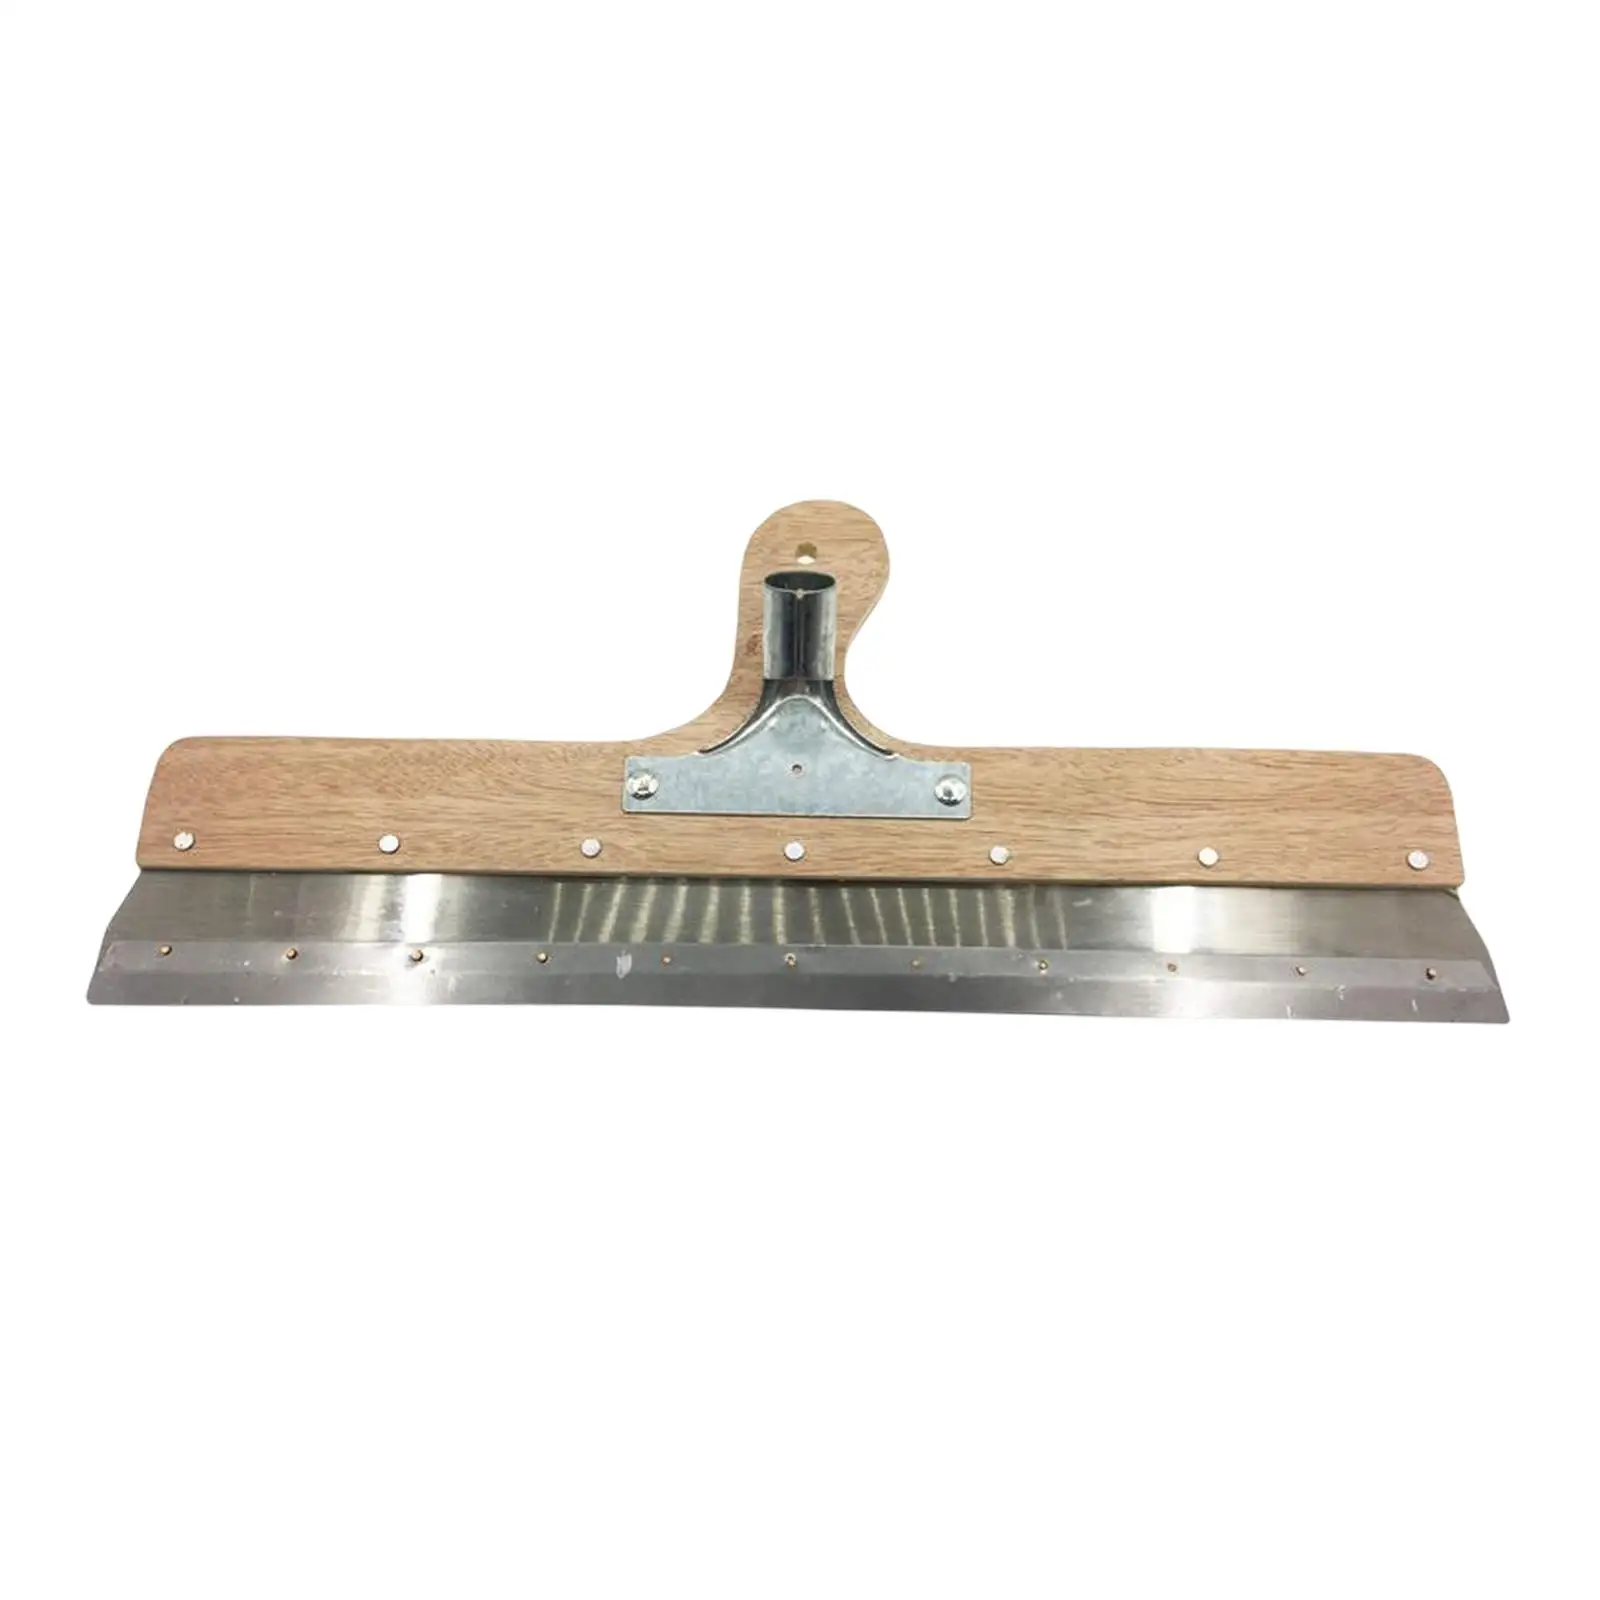 Cement Scraper Self Leveling Tool Sturdy Stainless Steel Durable Floor Construction Tools for Decorating Skimming Coating